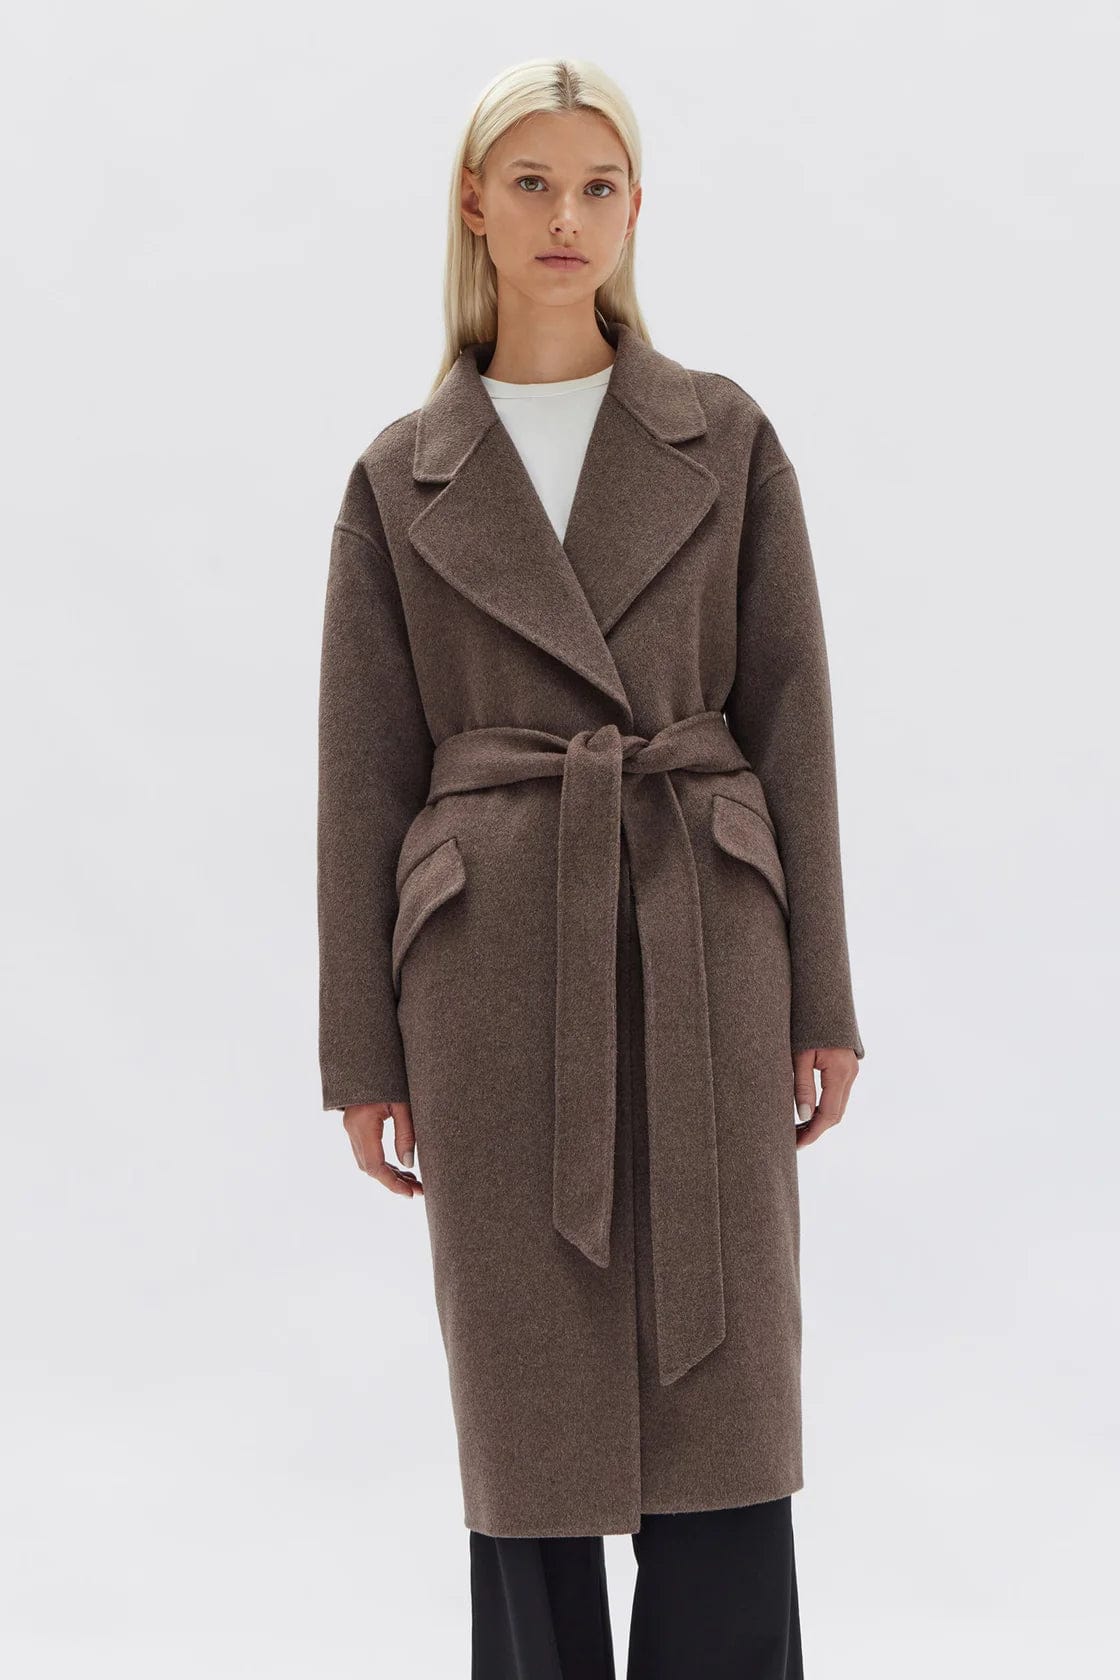 Assembly Label Coats - Wool Assembly Label | Sadie Single Breasted Wool Coat - Cocoa Marle